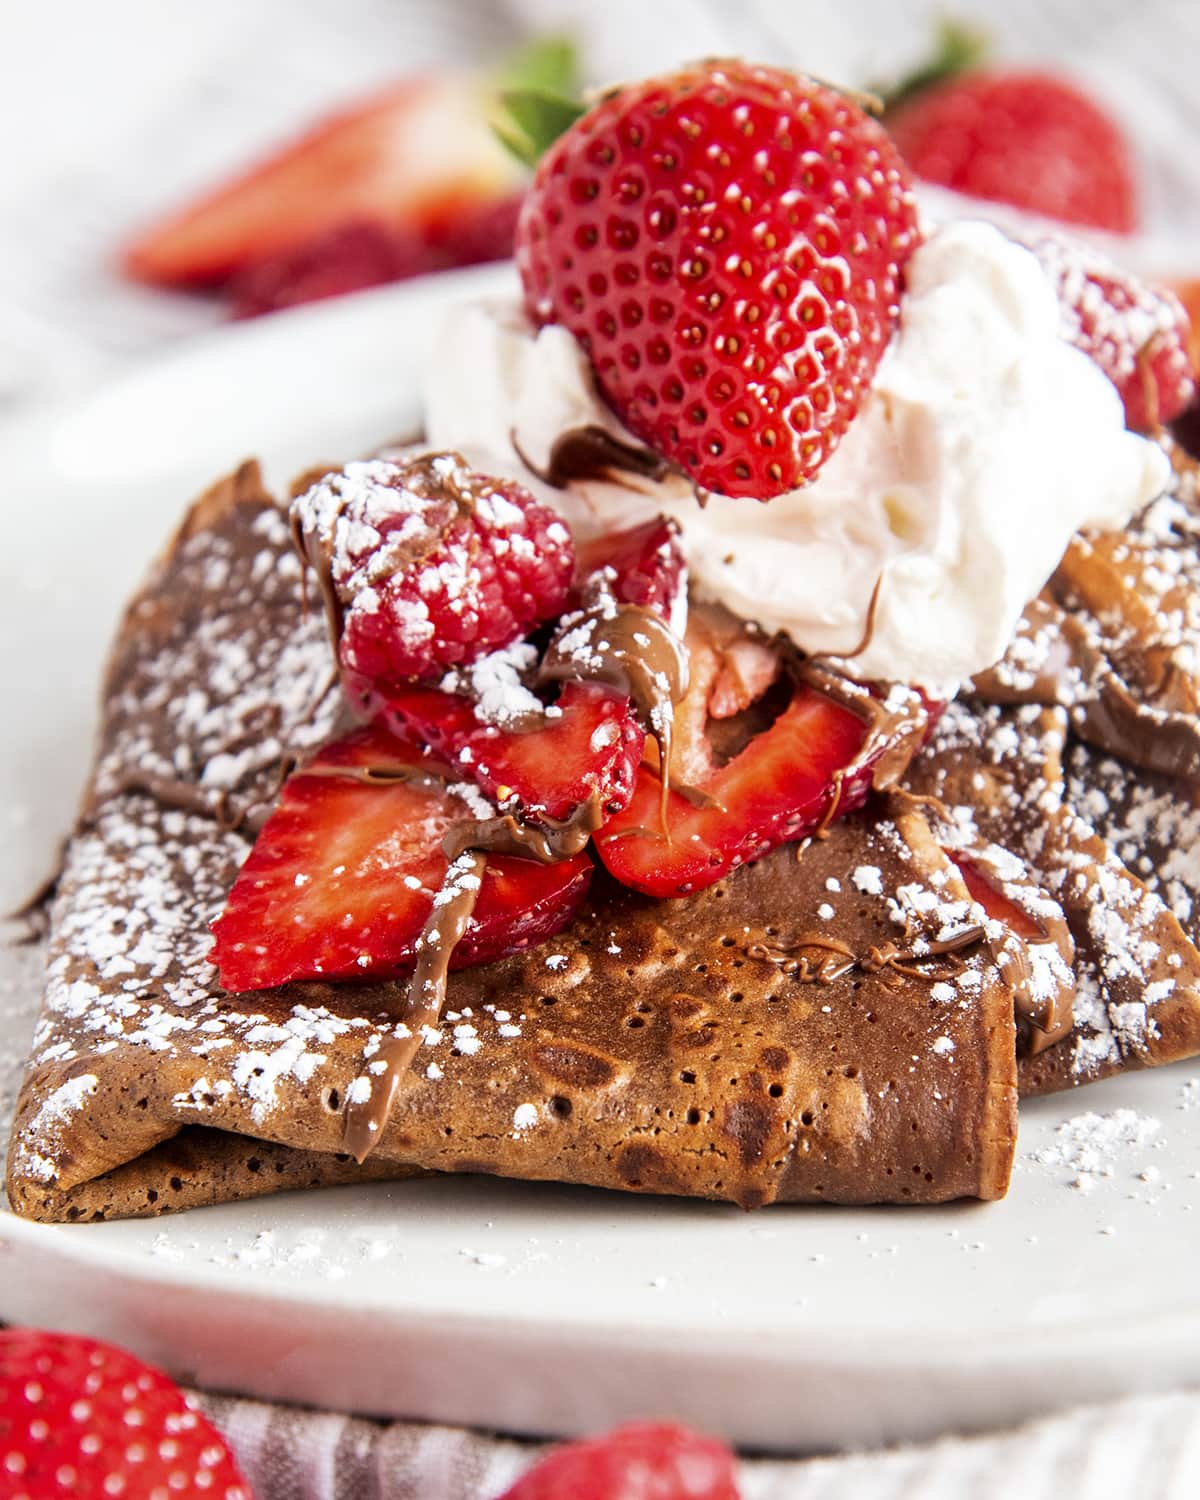 A close up of chocolate crepes folded up on a plate..